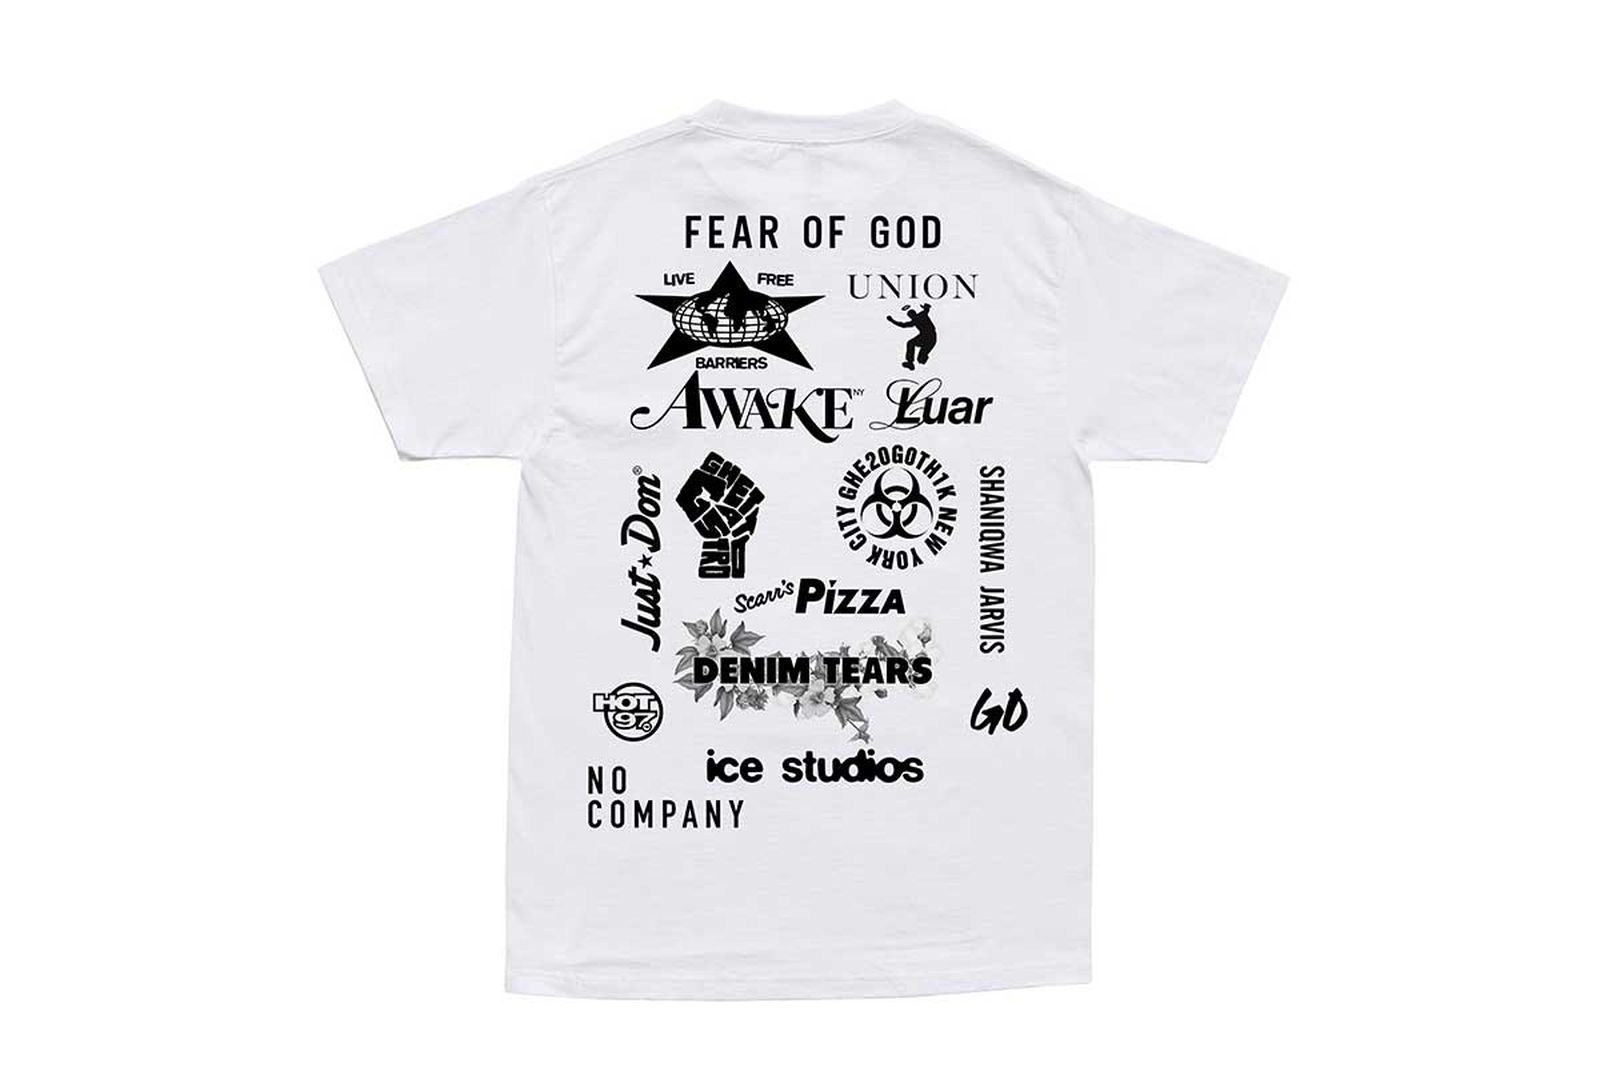 awake ny the bronx fire charity tee shirt Barriers Worldwide Denim Tears Fear of God GO GHE20G0TH1K Ghetto Gastro HOT97 ICE Studios Just Don Luar Union Los Angeles Scarr’s Pizza Shaniqwa Jarvis Shirt King Phade